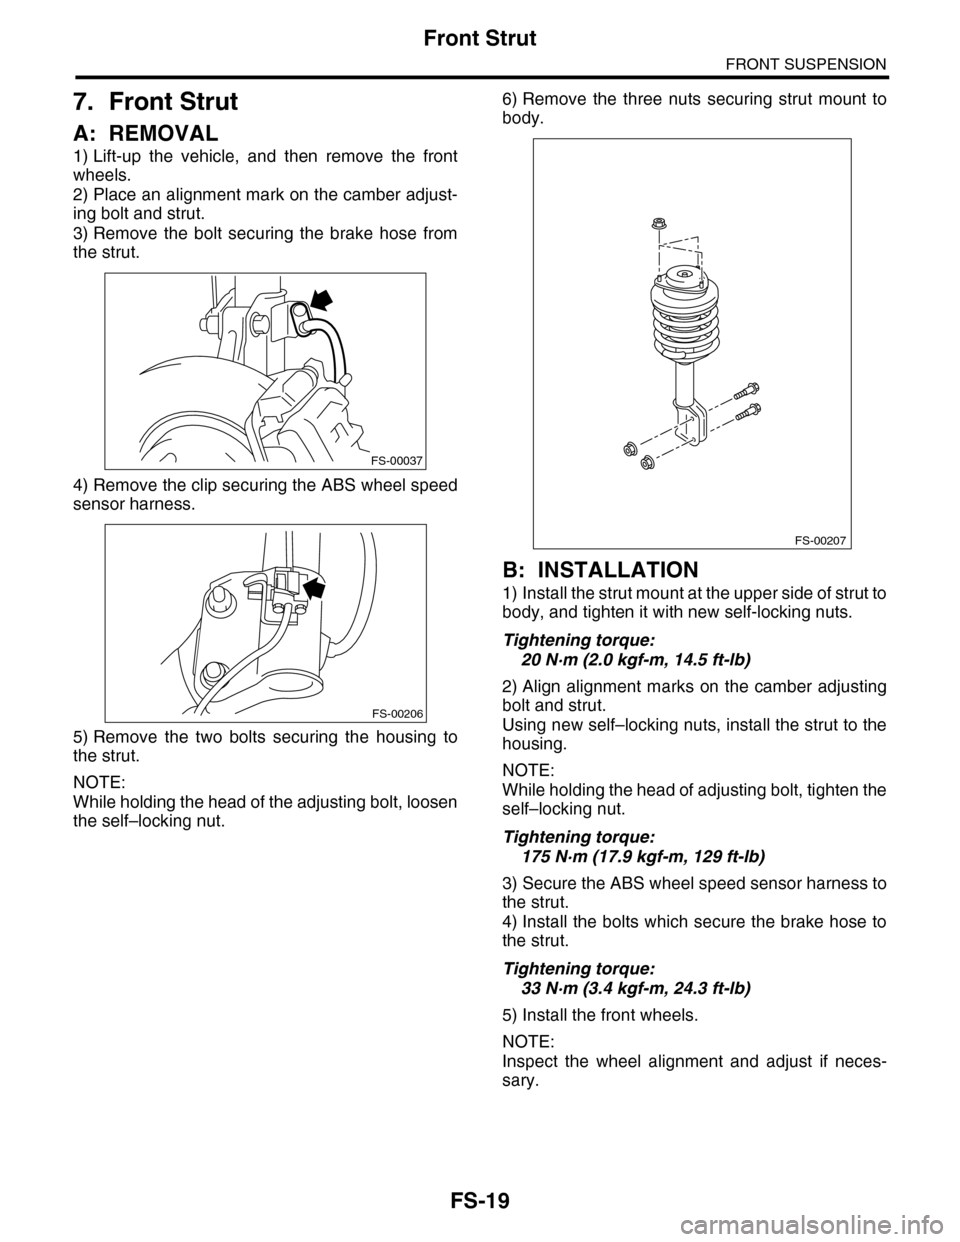 SUBARU TRIBECA 2009 1.G Service Workshop Manual FS-19
Front Strut
FRONT SUSPENSION
7. Front Strut
A: REMOVAL
1) Lift-up  the  vehicle,  and  then  remove  the  front
wheels.
2) Place an alignment mark on the camber adjust-
ing bolt and strut.
3) Re